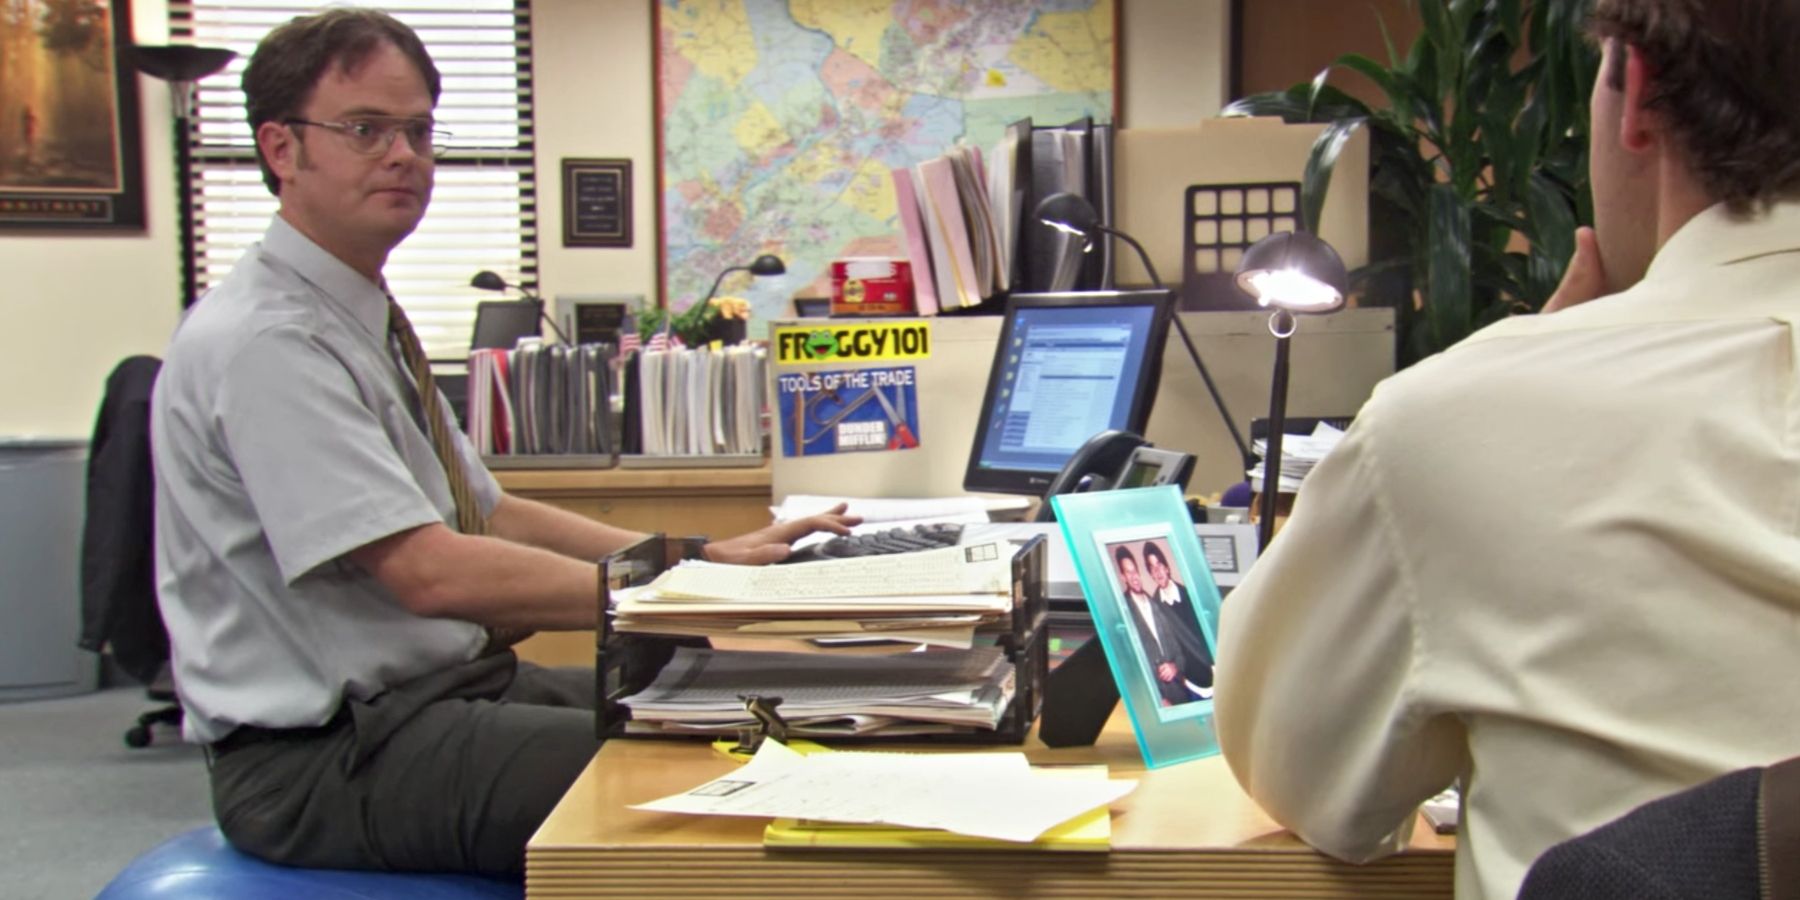 Dwight sitting on a fitness orb on The Office